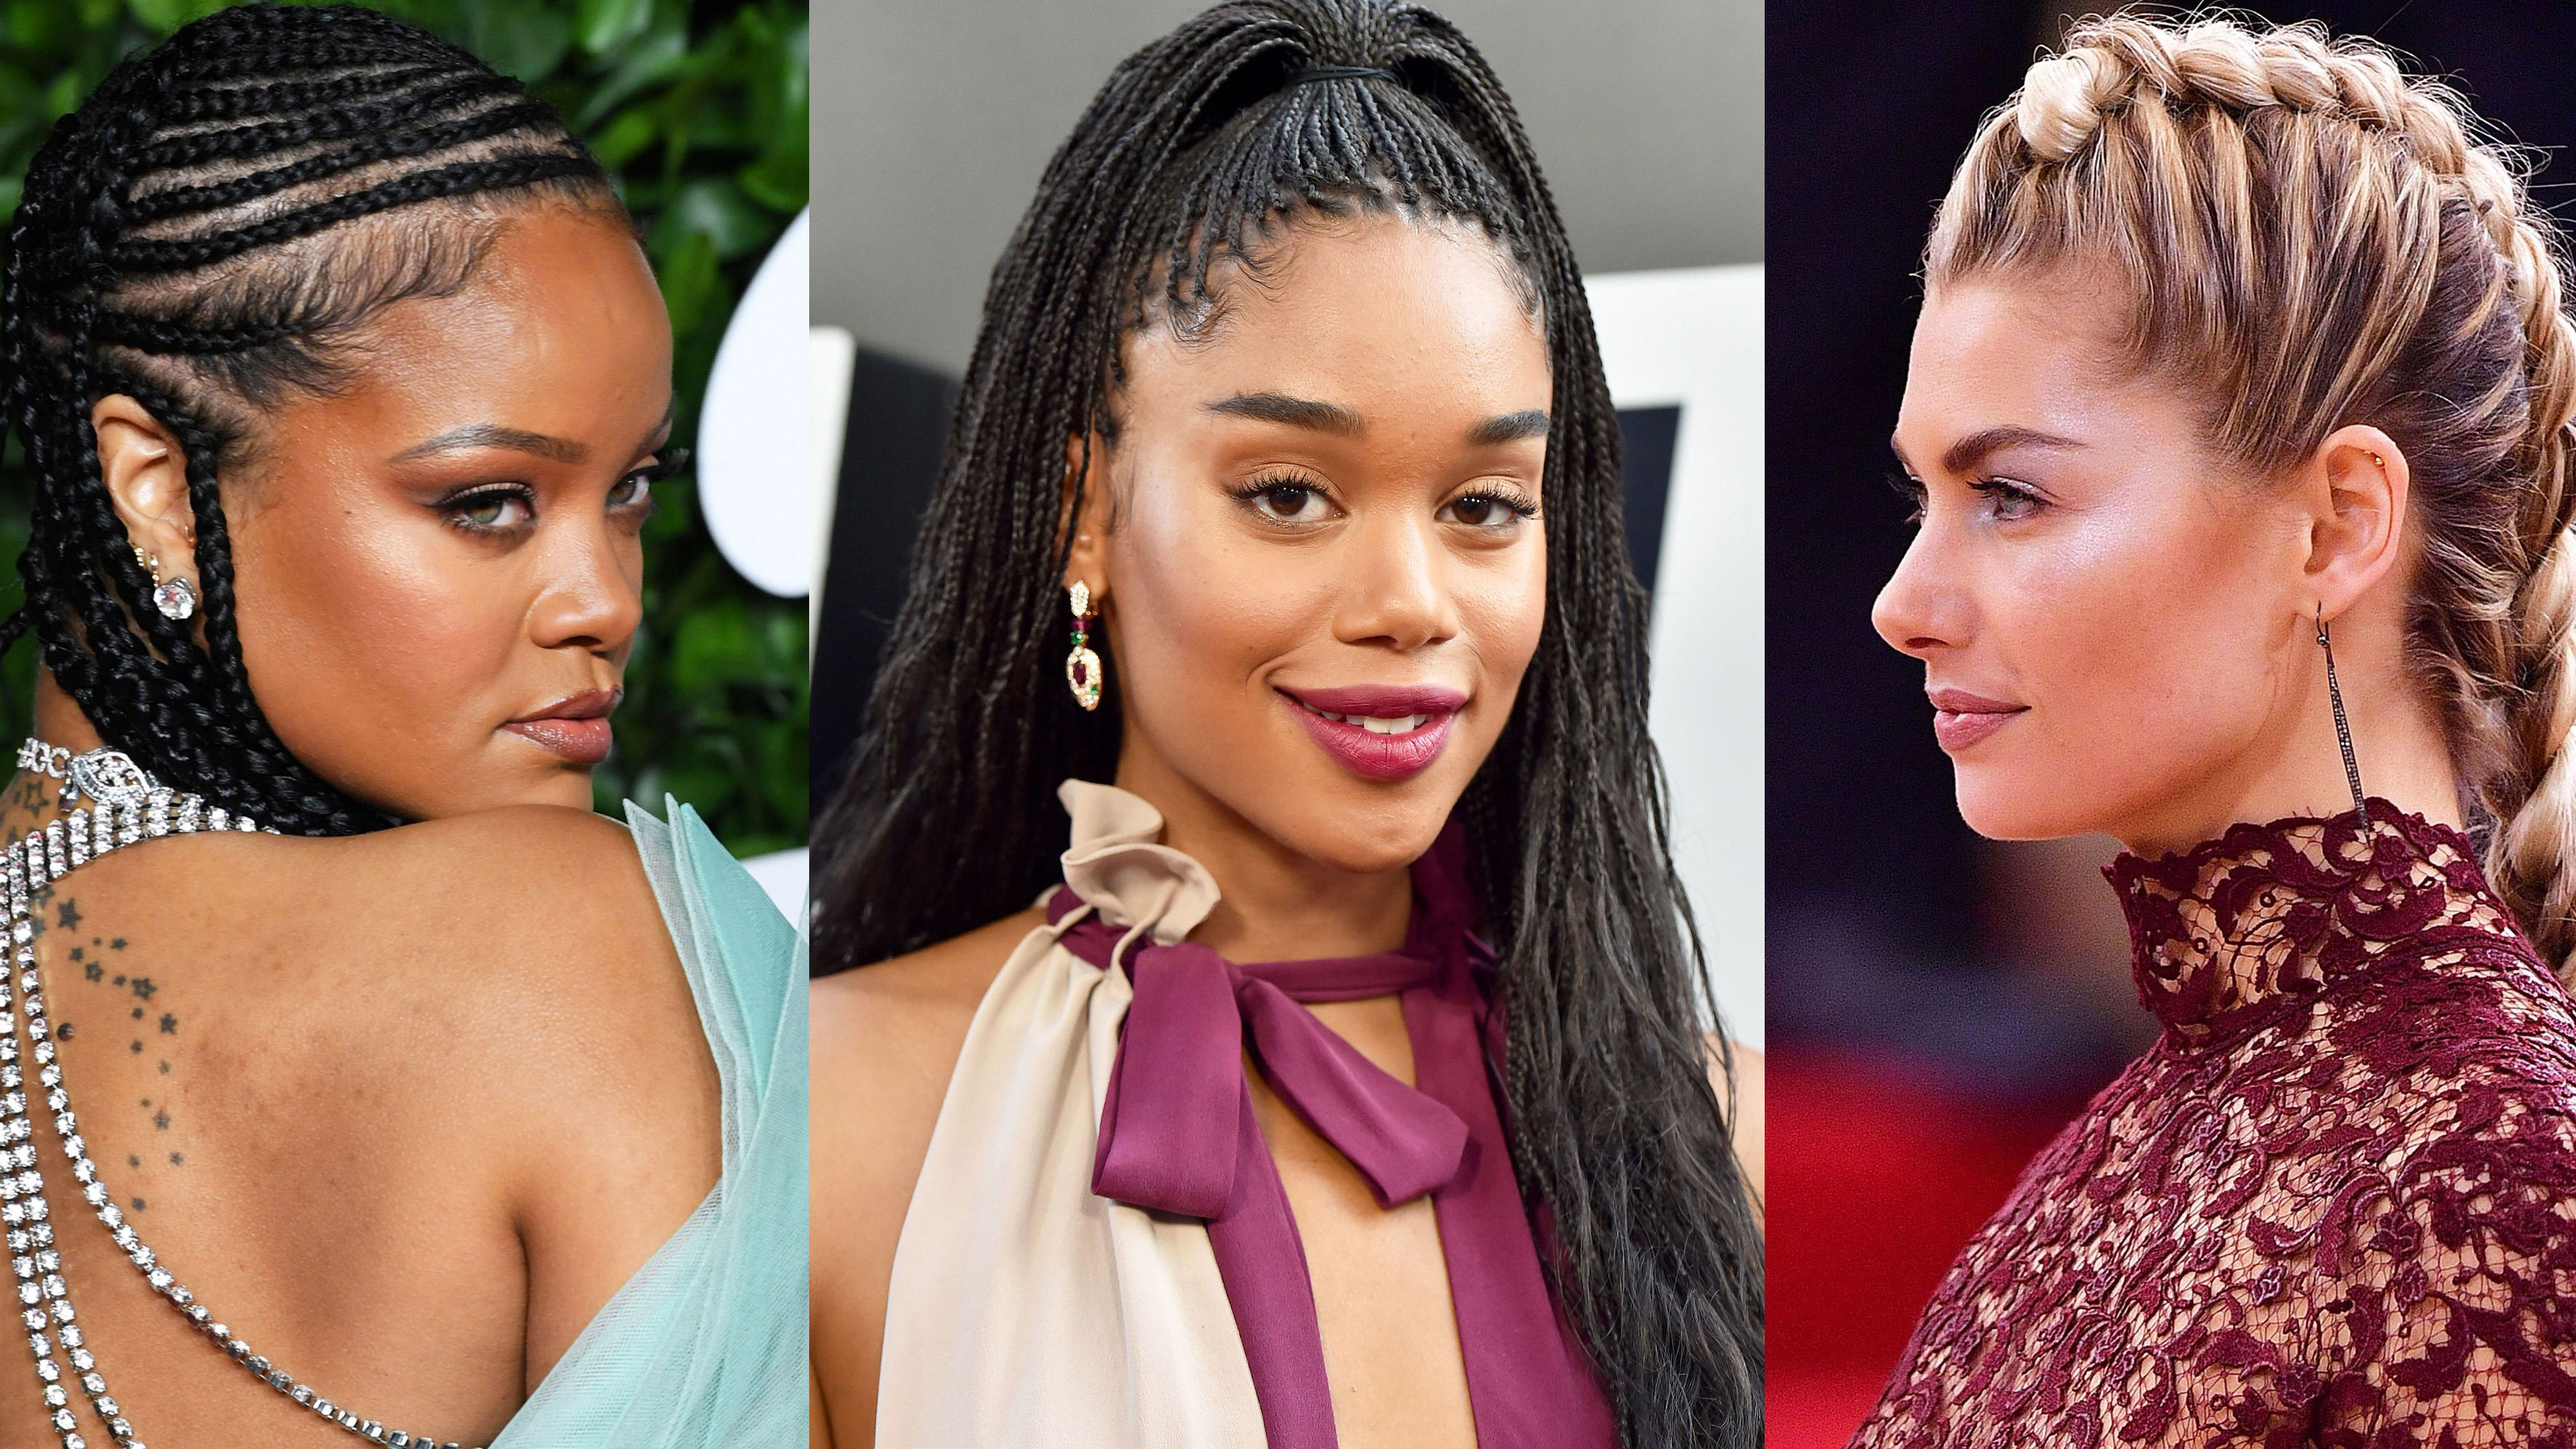 21 Braided Hairstyles You Need to Try Next